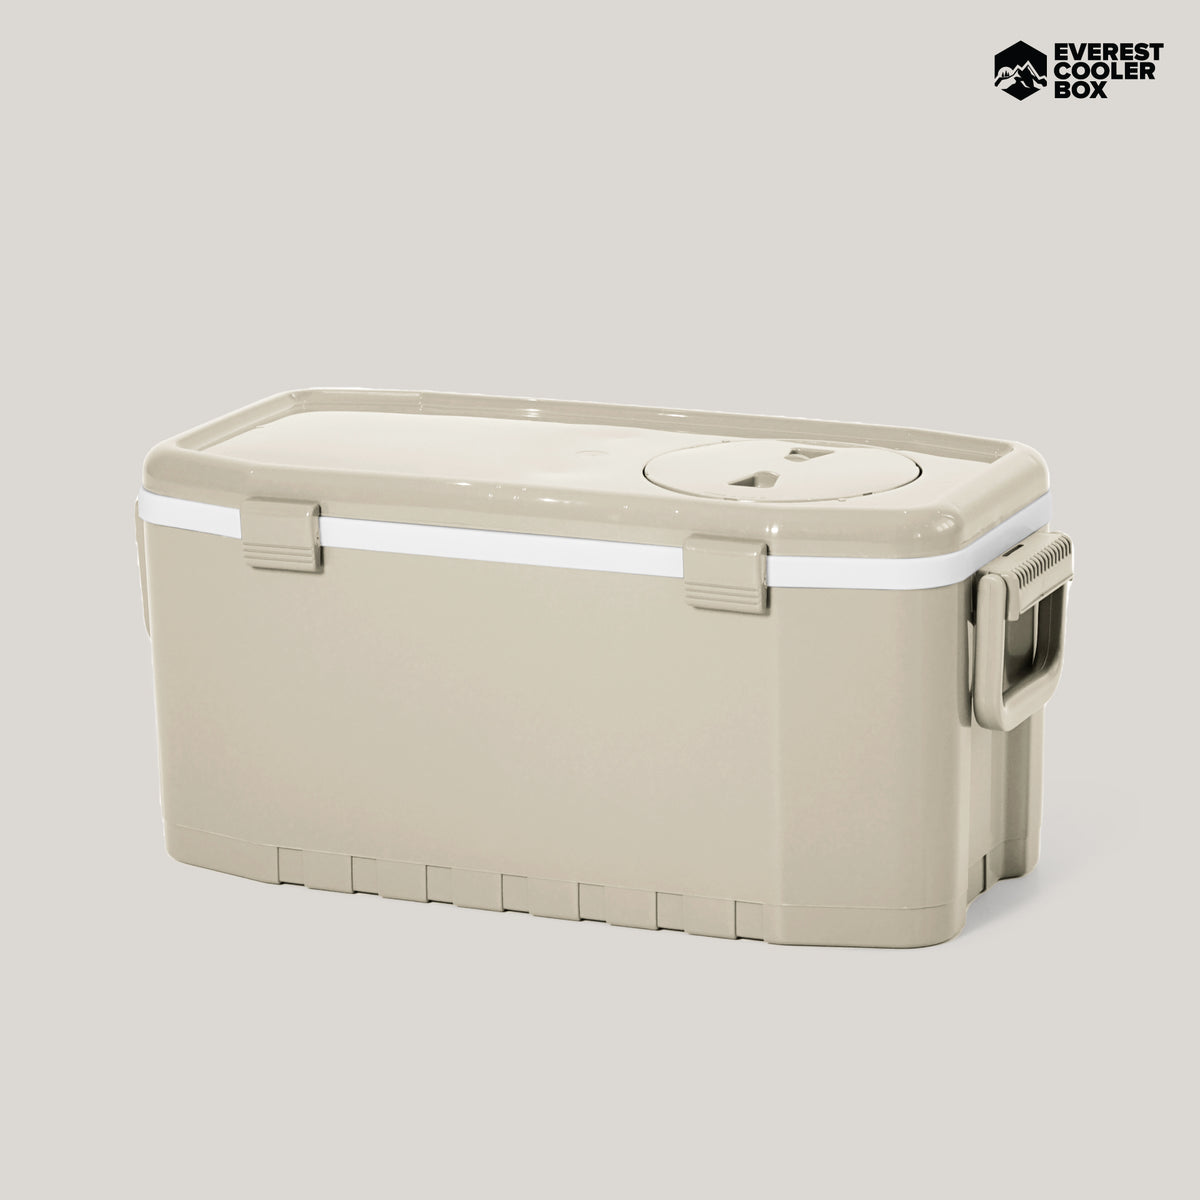 EVEREST Camping Collection Cooler Box 35 Liters AG993